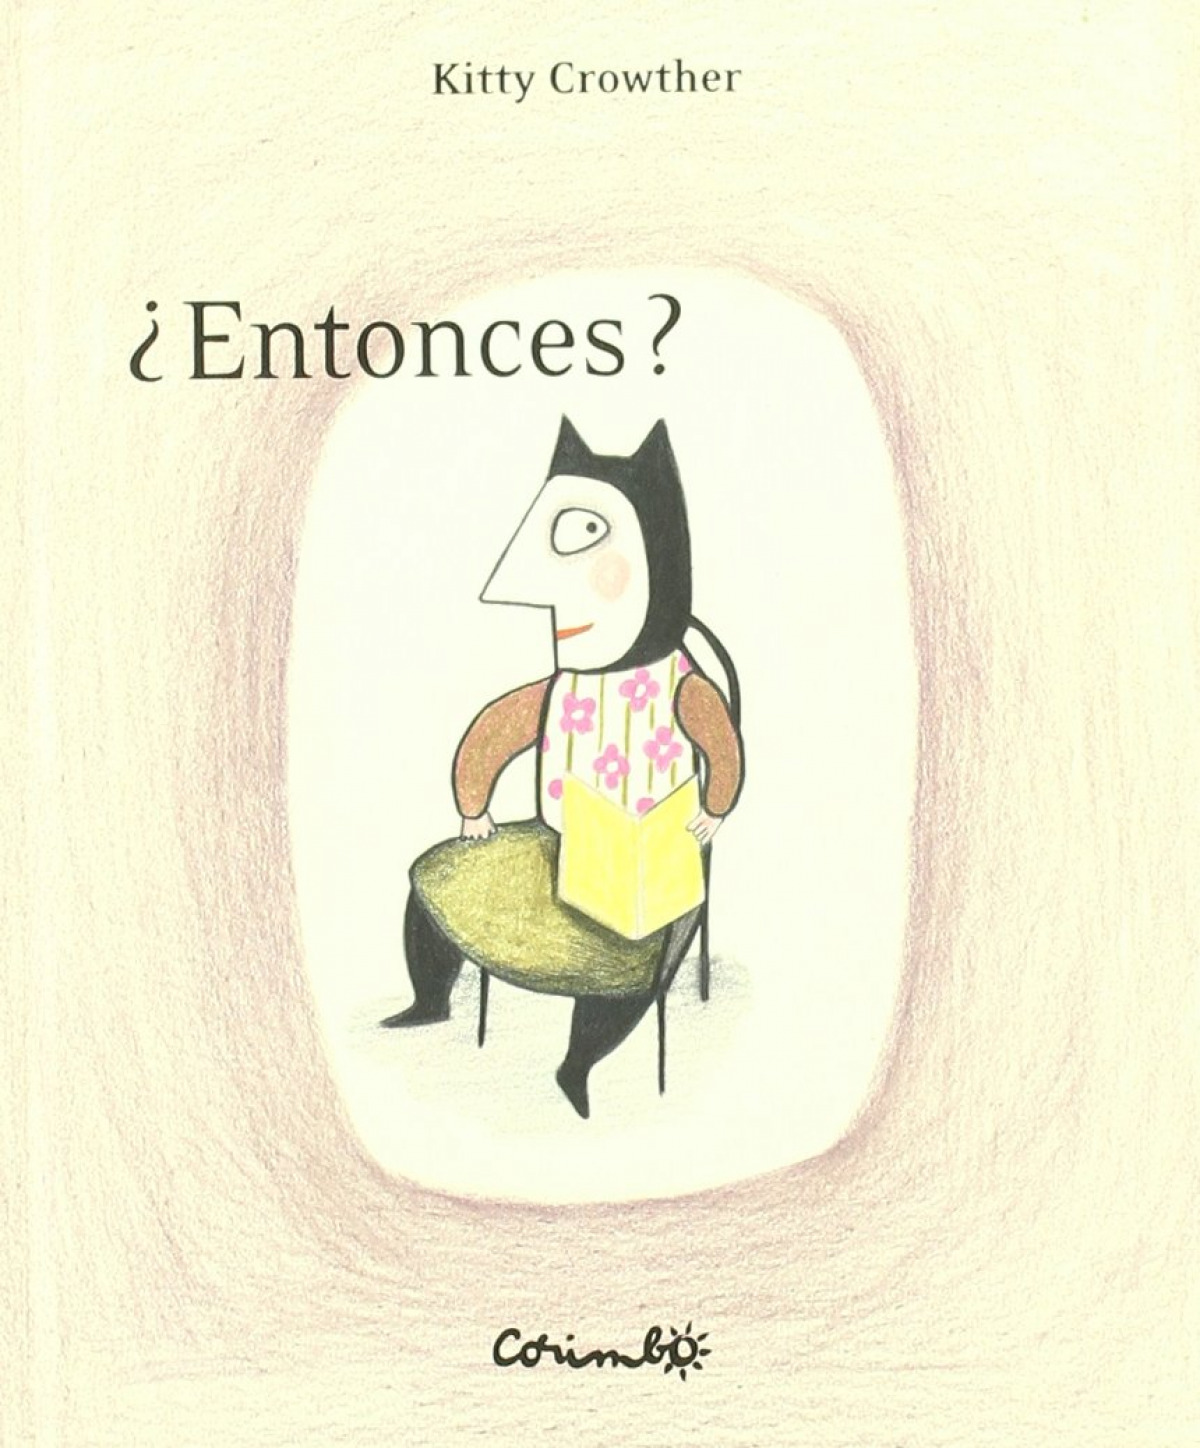 ¿Entonces? - Crowther, Kitty